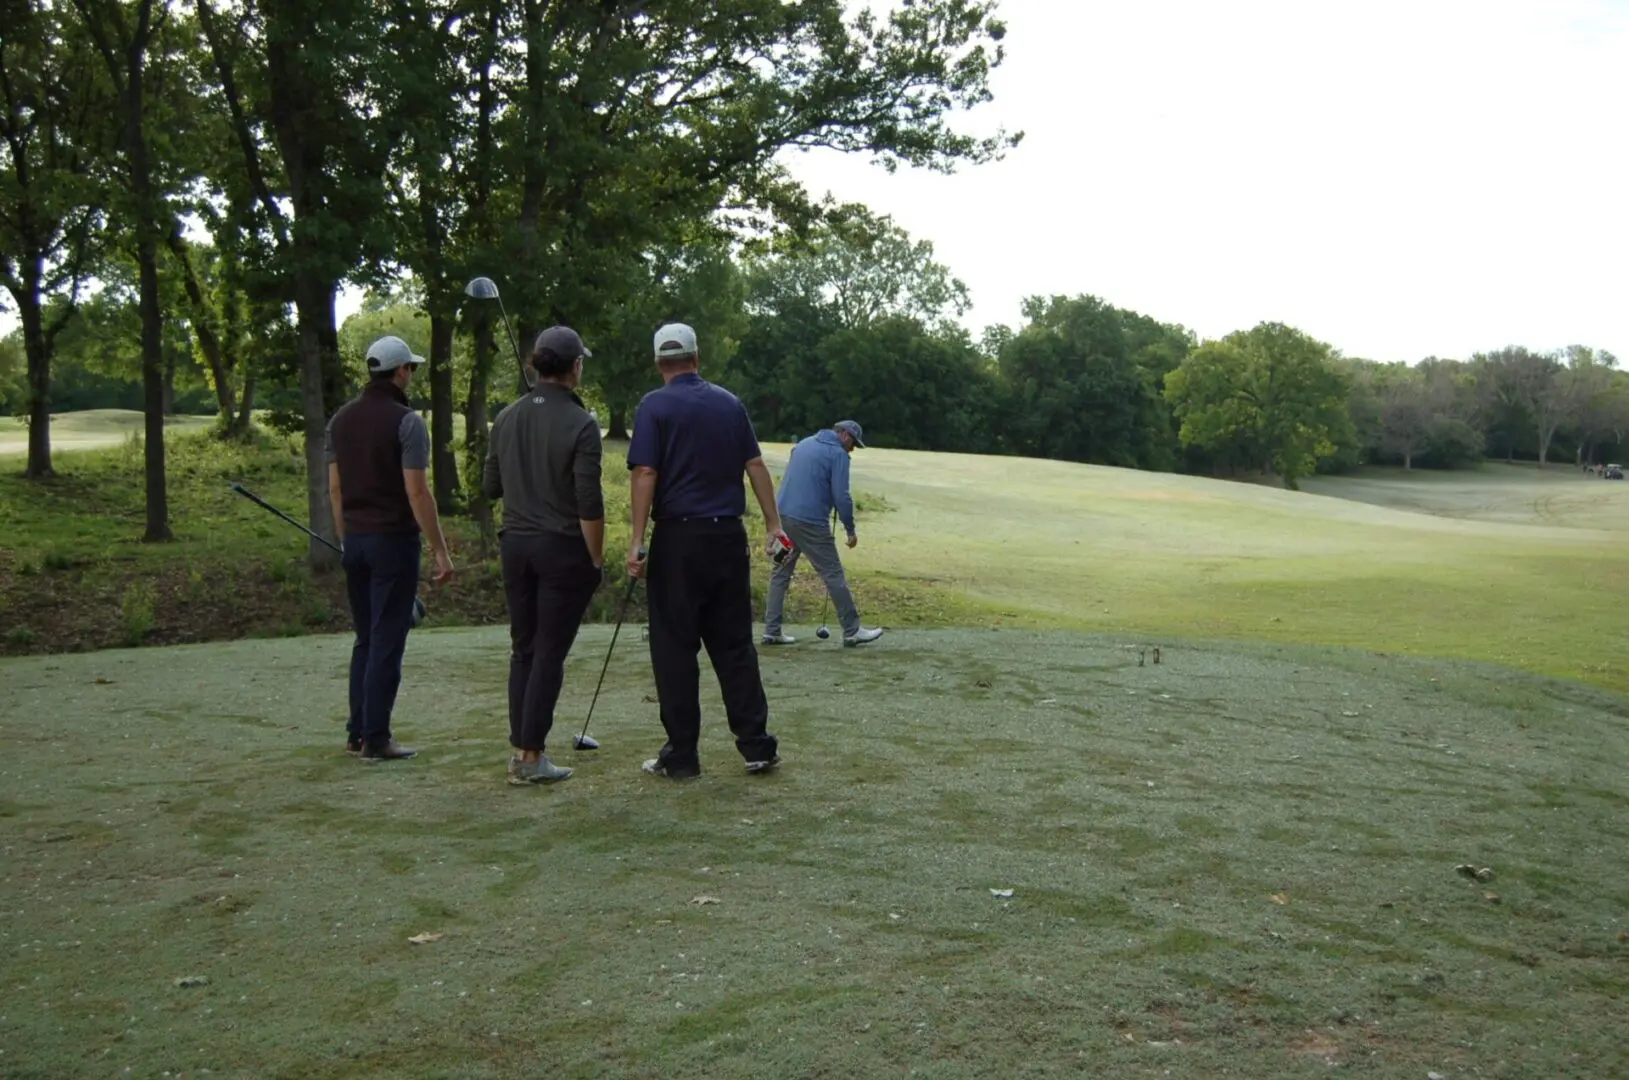 A group of people standing on a golf course.